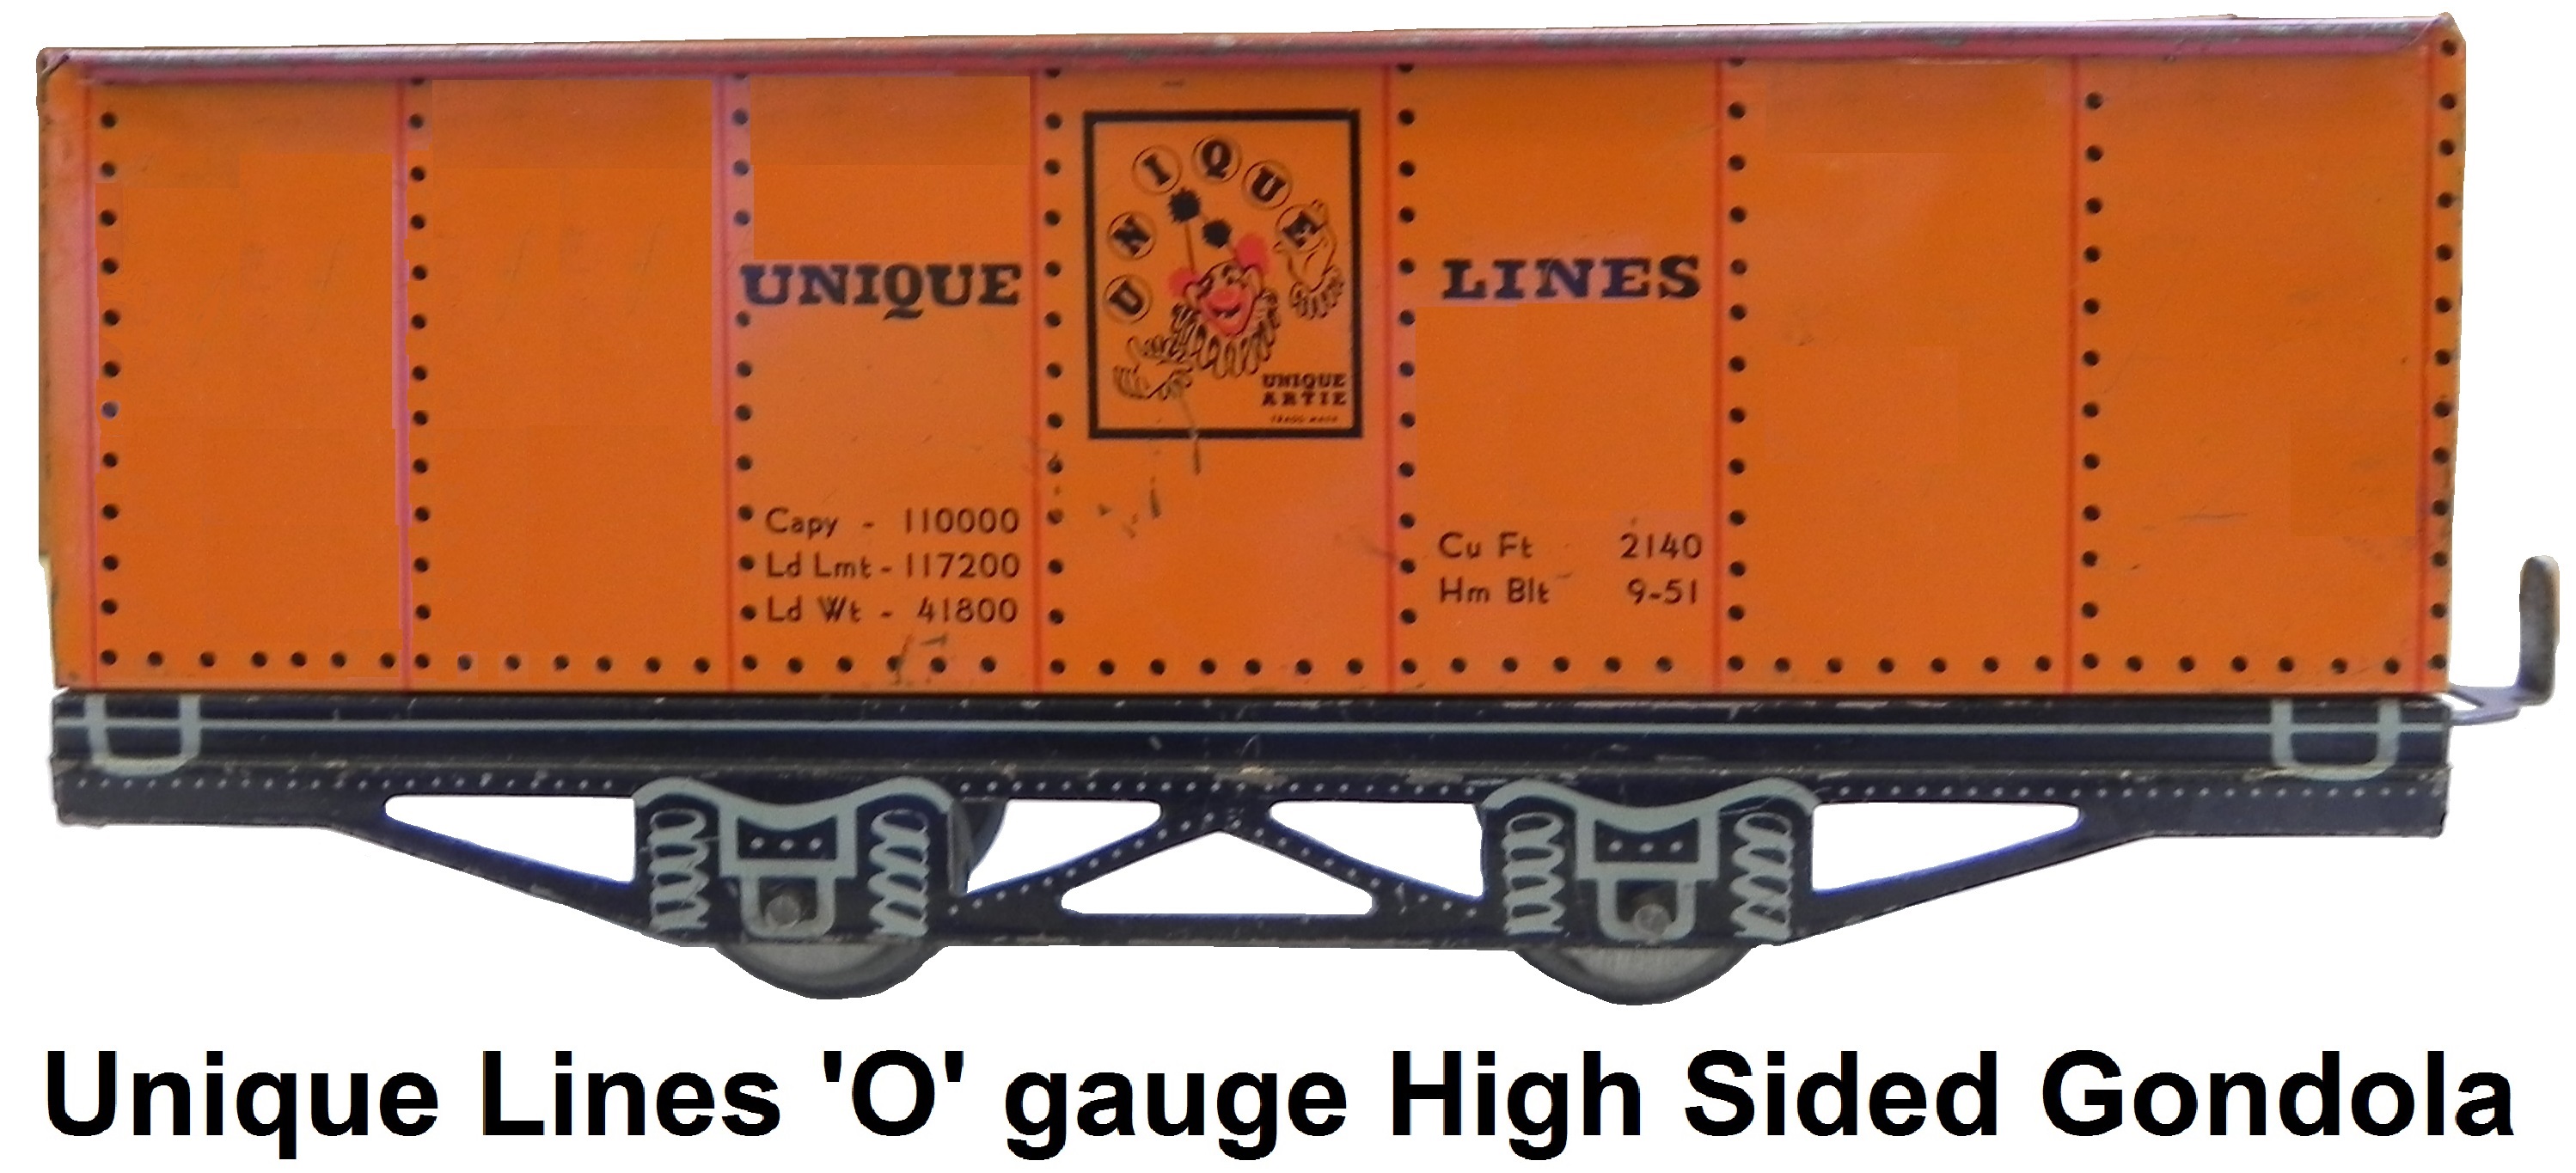 Unique Lines tinplate lithographed 'O' gauge high sided gondola